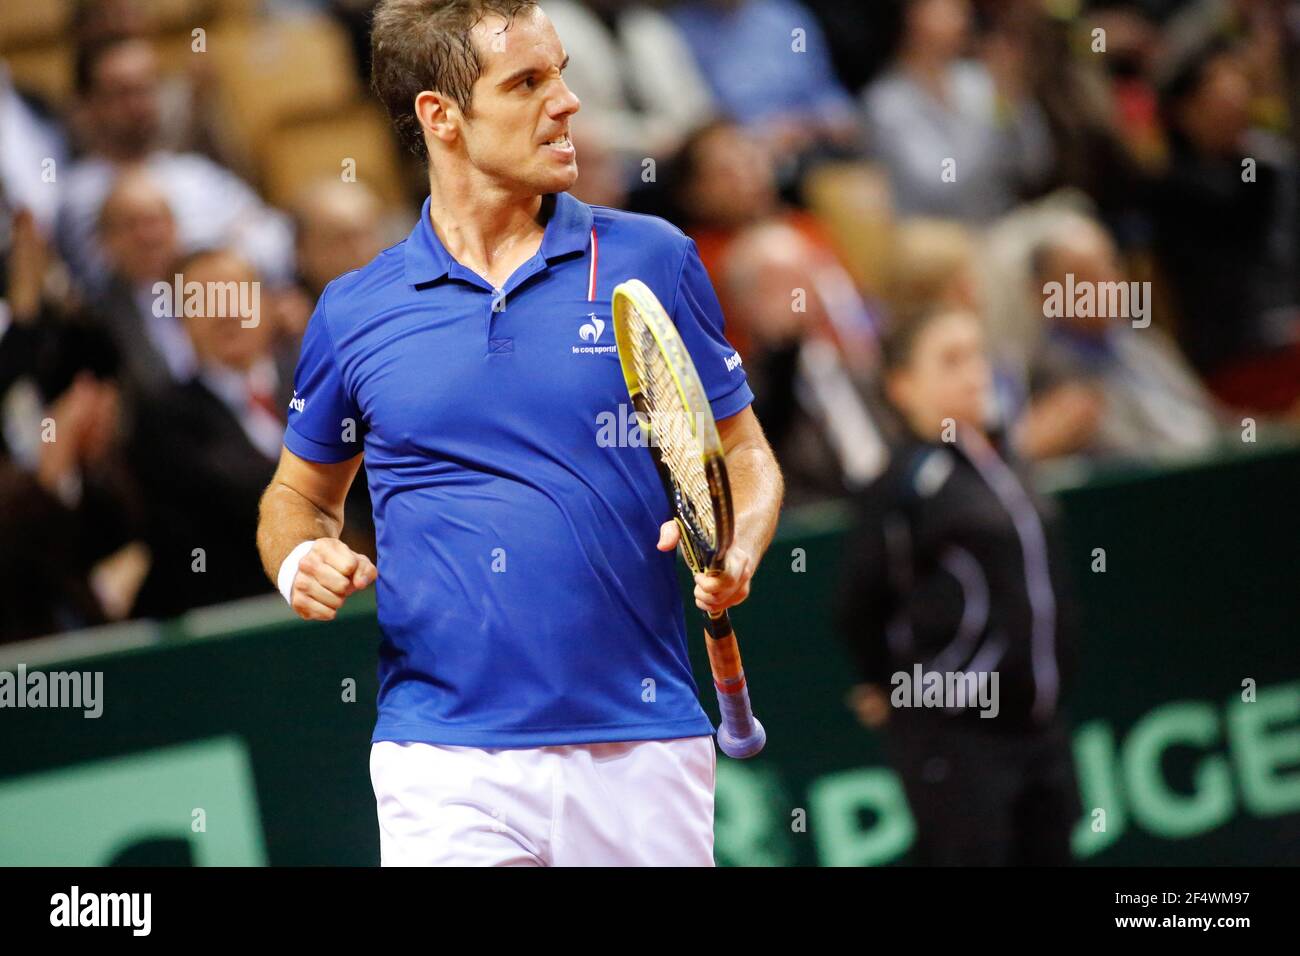 Richard Gadquet during the Tennis Davis Cup 2014 world group 1st round,  France v Australia, day 1 single Richard Gasquet v Nick Kyrgios, on  february 1, 2014 at Vendespace, la Roche sur